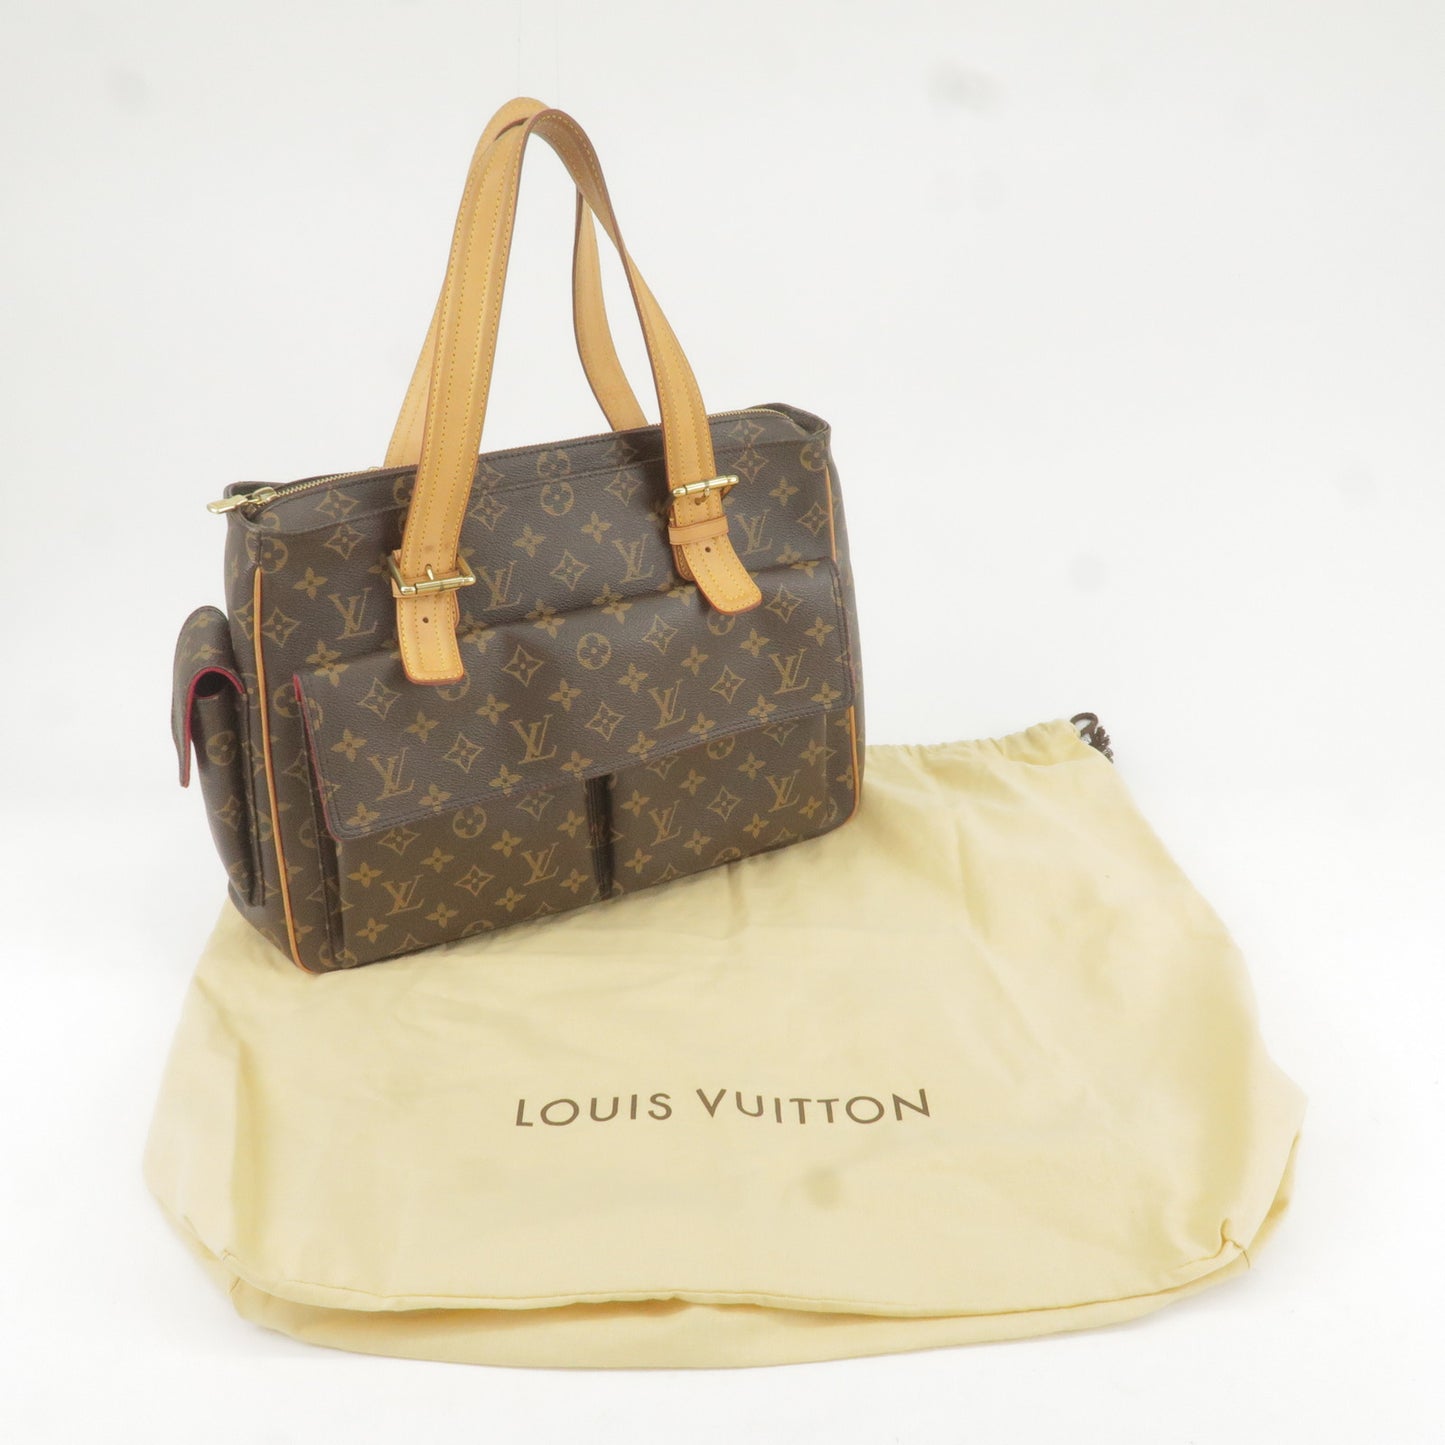 LOUIS VUITTON. Shoulder bag in navy leather and monogram…